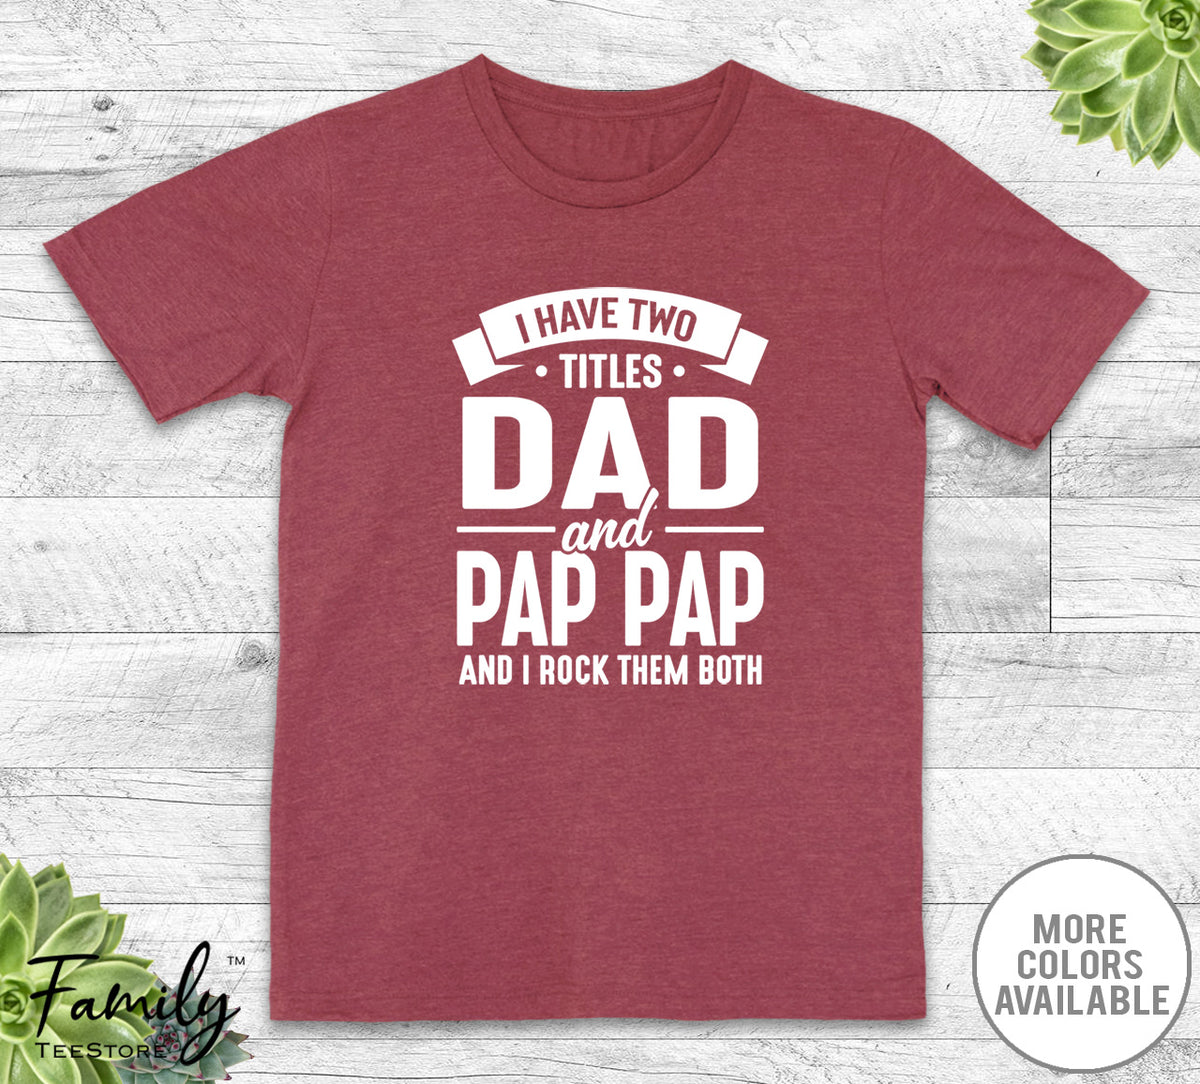 I Have Two Titles Dad And Pap Pap - Unisex T-shirt - Pap Pap Shirt - Funny Pap Pap Gift - familyteeprints